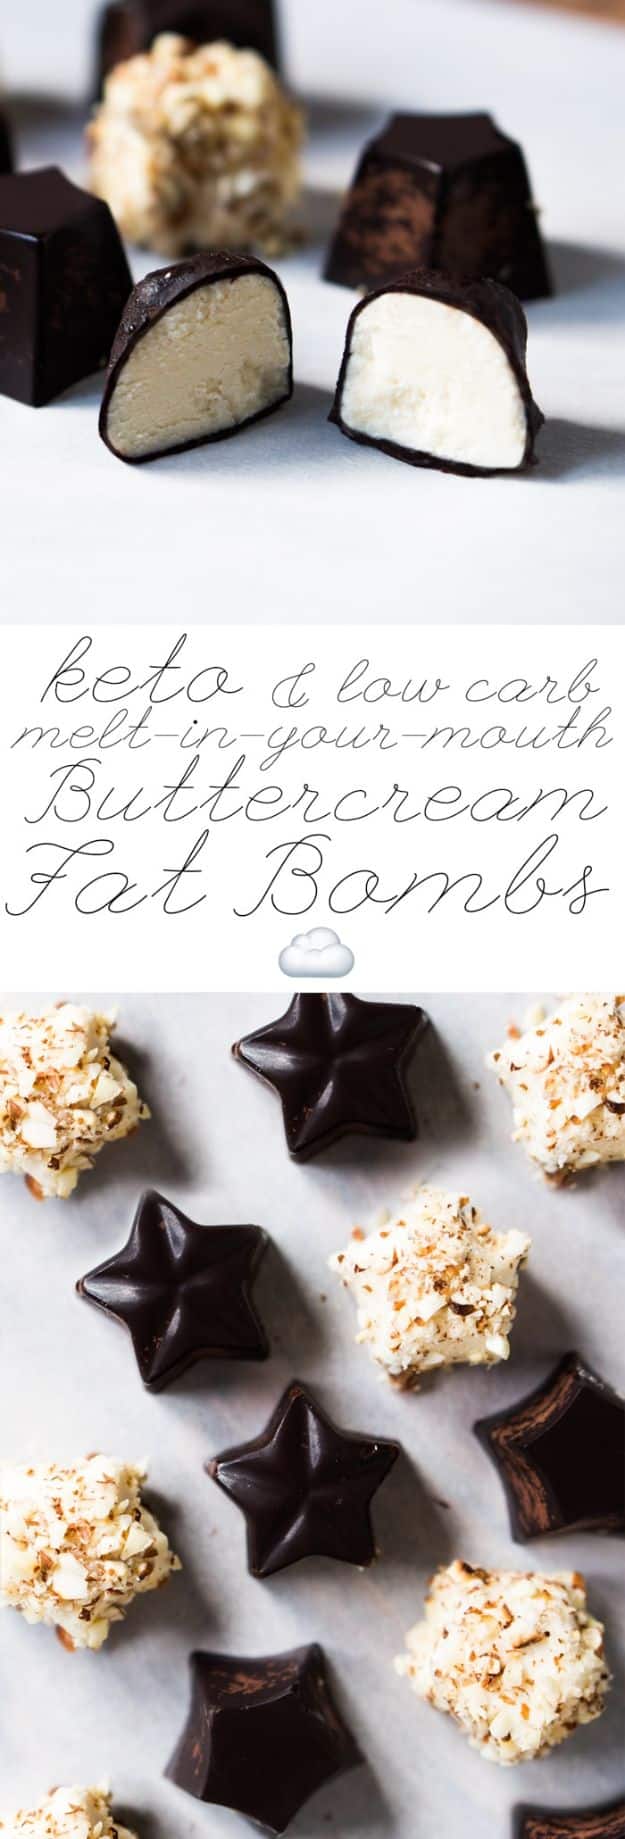 Keto Fat Bombs and Best Ketogenic Recipe Ideas to Make At Home - Melt-In-Your-Mouth Buttercream Fat Bombs - Easy Recipes With Peanut Butter, Cream Cheese, Chocolate, Coconut Oil, Coffee low carb fat bombs #keto #ketorecipes